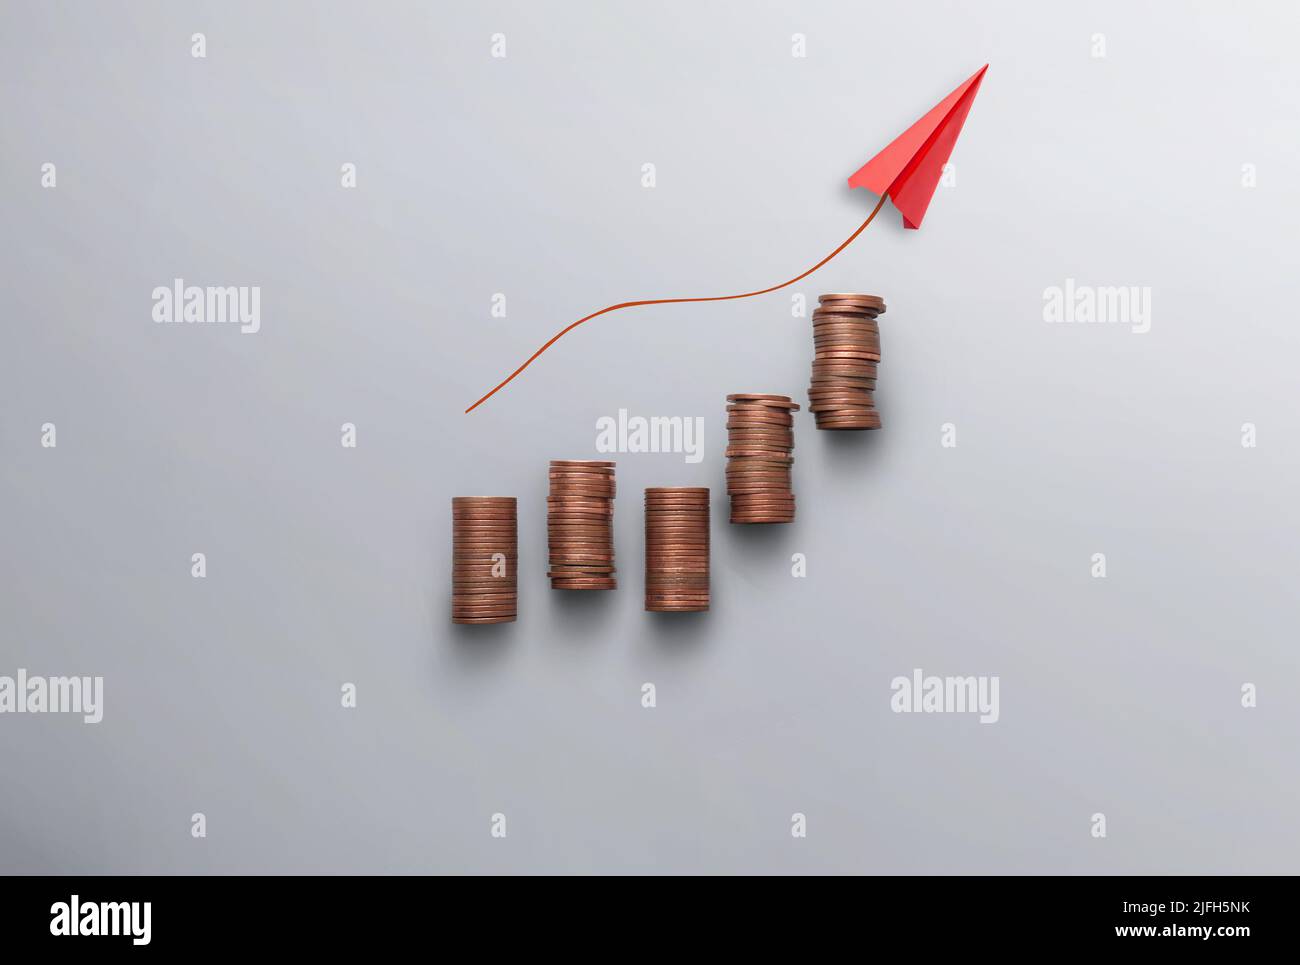 Increasing inflation, costs and prices concept, business chart stacks of coins with paper airplane moving upwards Stock Photo